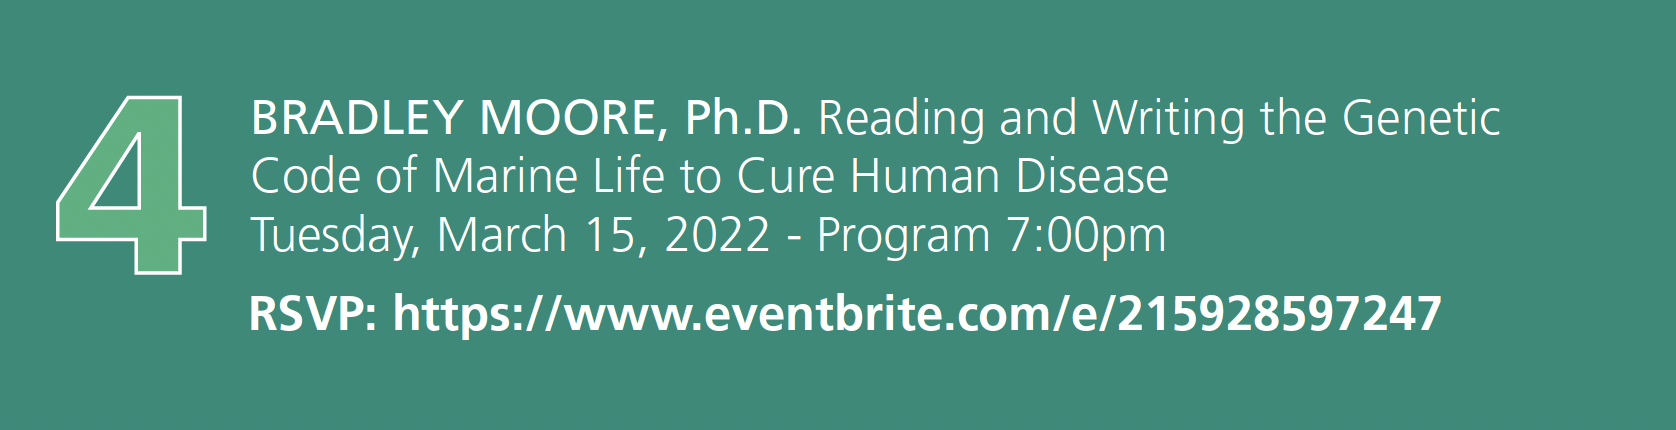 Number 4. Bradley Moore, ph.D. Reading and Writing the Genetic Code of Marine Life to Cure Human Disease. Tuesday, March 15, 2022 - Program 7:00pm RSVP: event registration link embedded in image